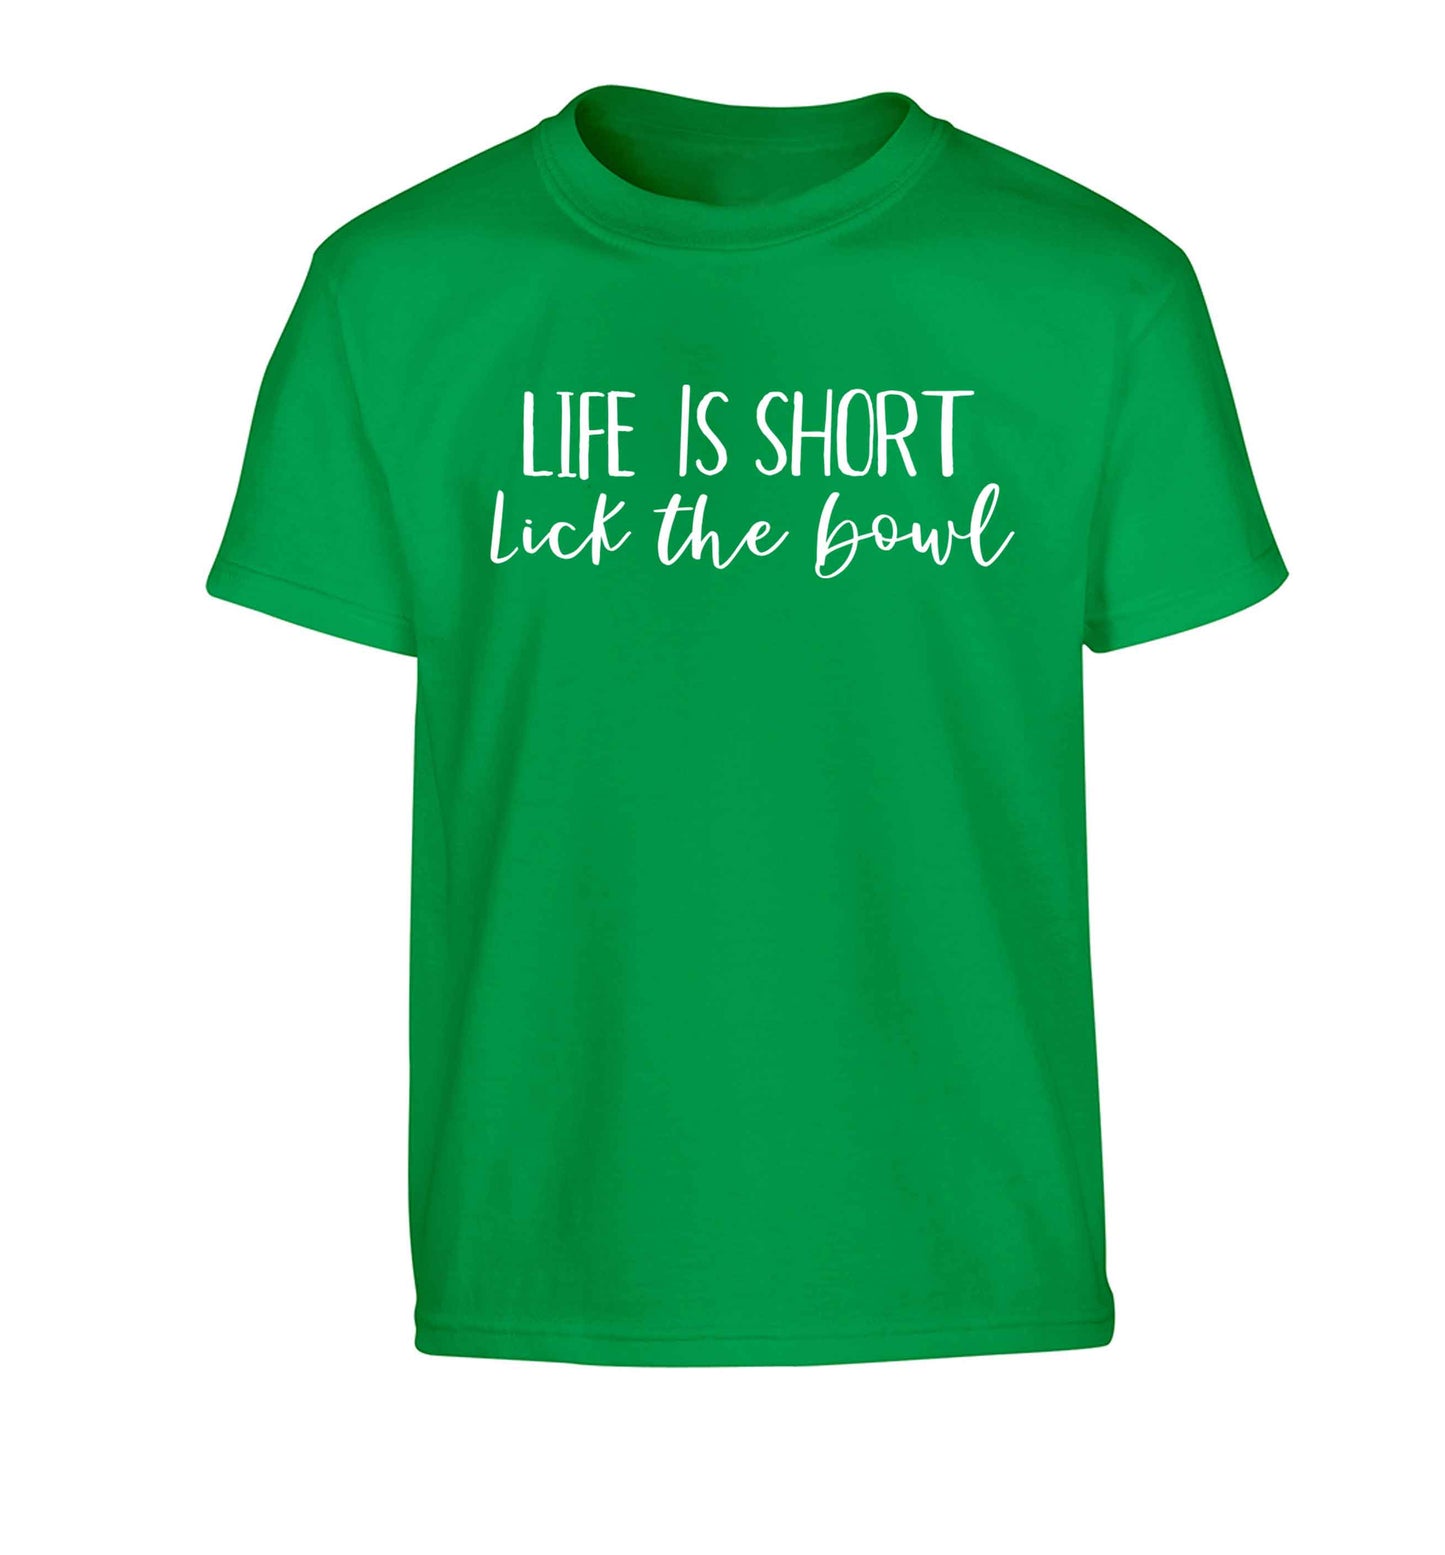 Life is short lick the bowl Children's green Tshirt 12-13 Years